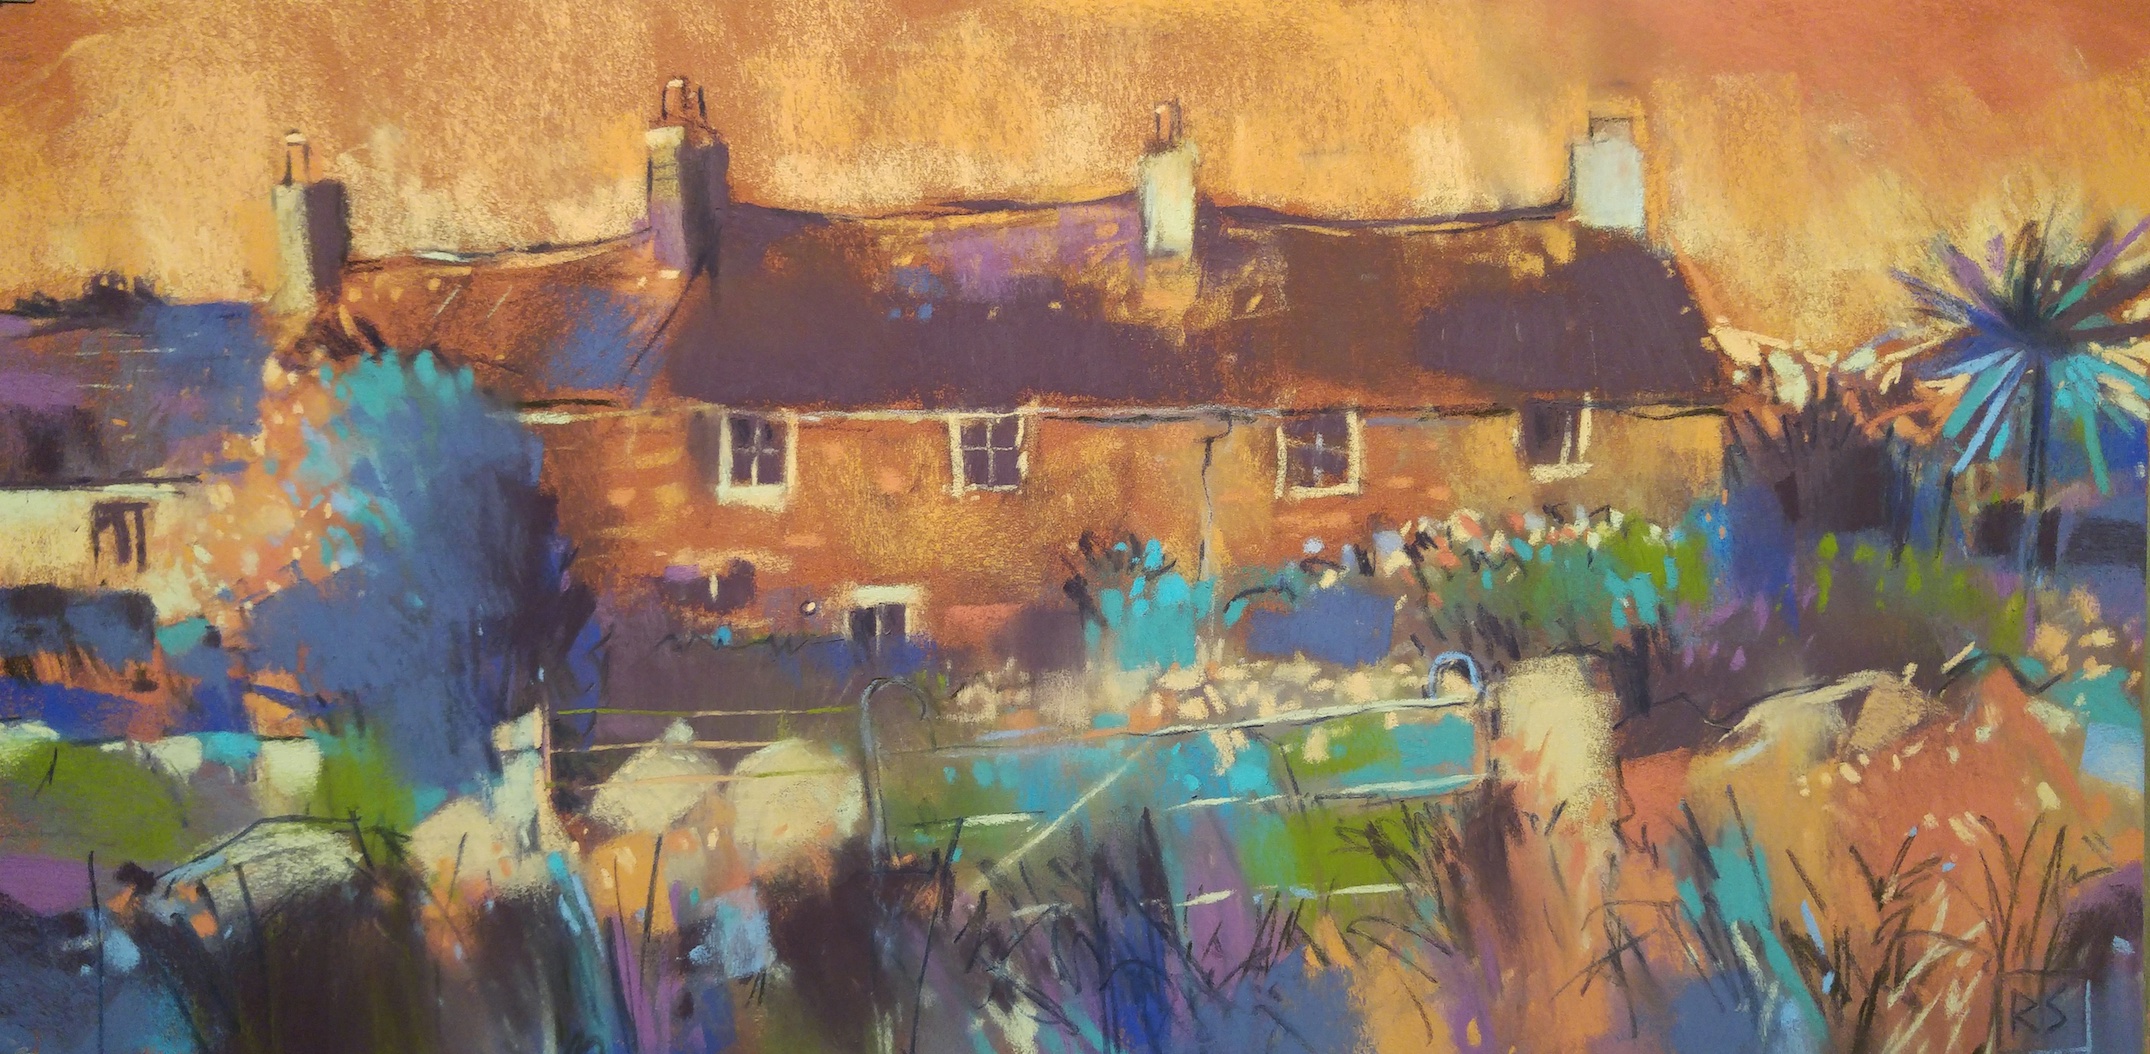 Richard Suckling, "Zennor Magic," pastel on Sennelier LaCarte, 19 ¾ x 9 ¾ in. A recent Cornish pastel based on a location sketch. Looser than my usual studio style benefiting from my plein air experience.